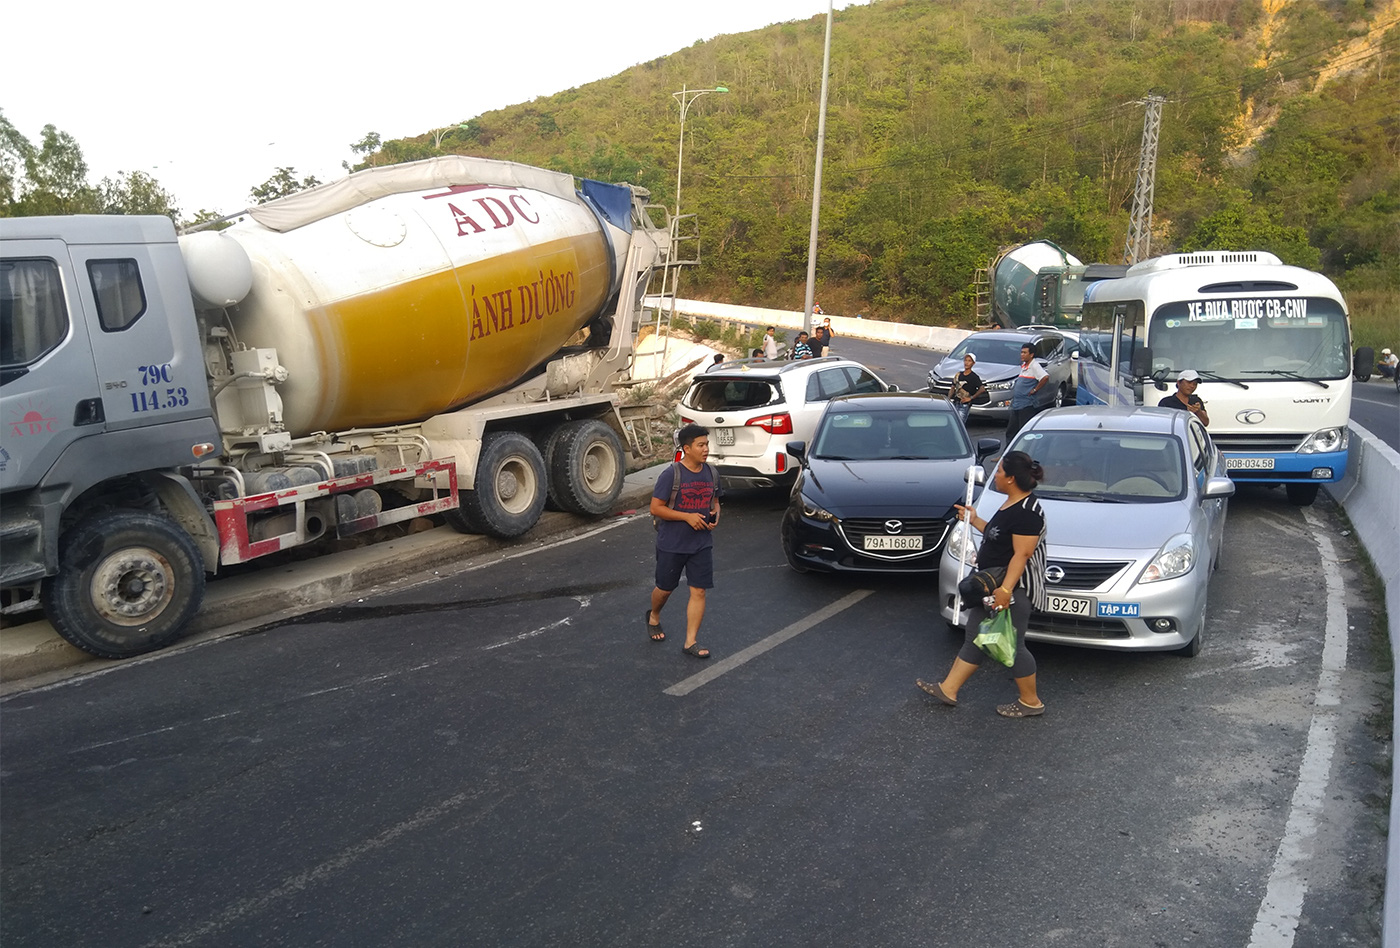 Pile-up on mountain pass after van crashes into median strip in Nha Trang